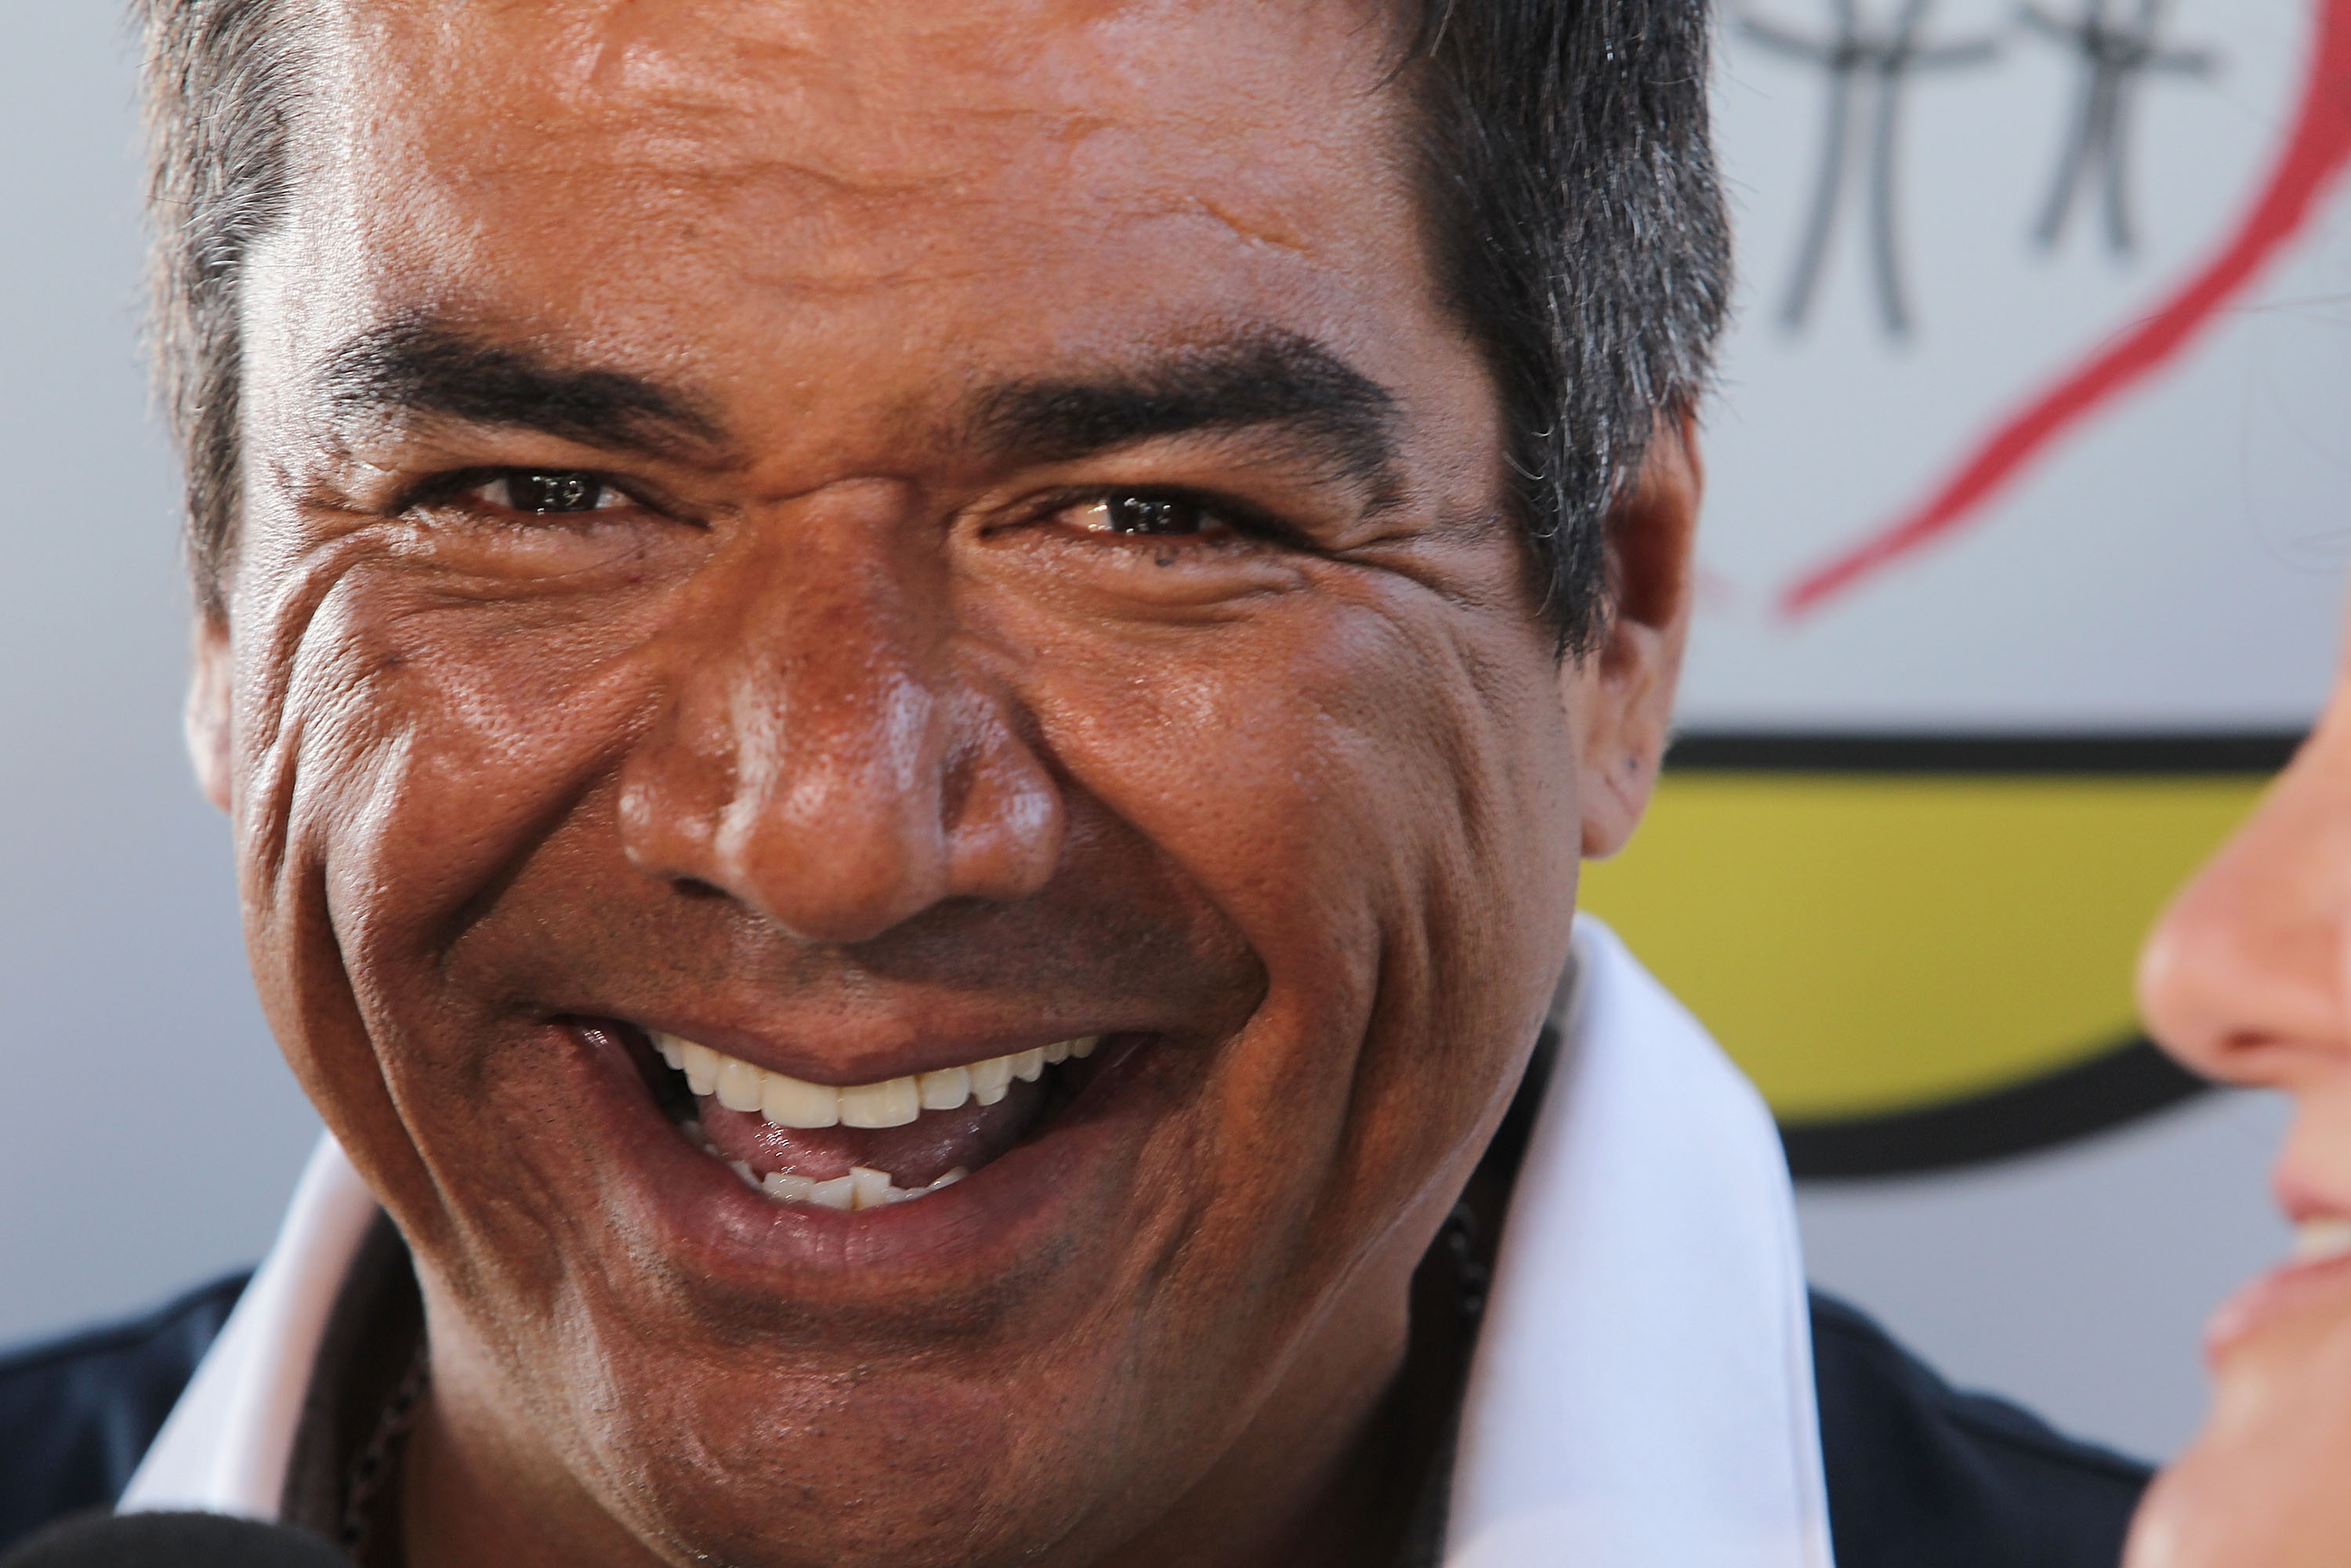 George Lopez at The Third Annual George Lopez Celebrity Golf Classic held at The Lakeside Golf Club on May 3, 2010 in Toluca Lake, California. | Source: Getty Images